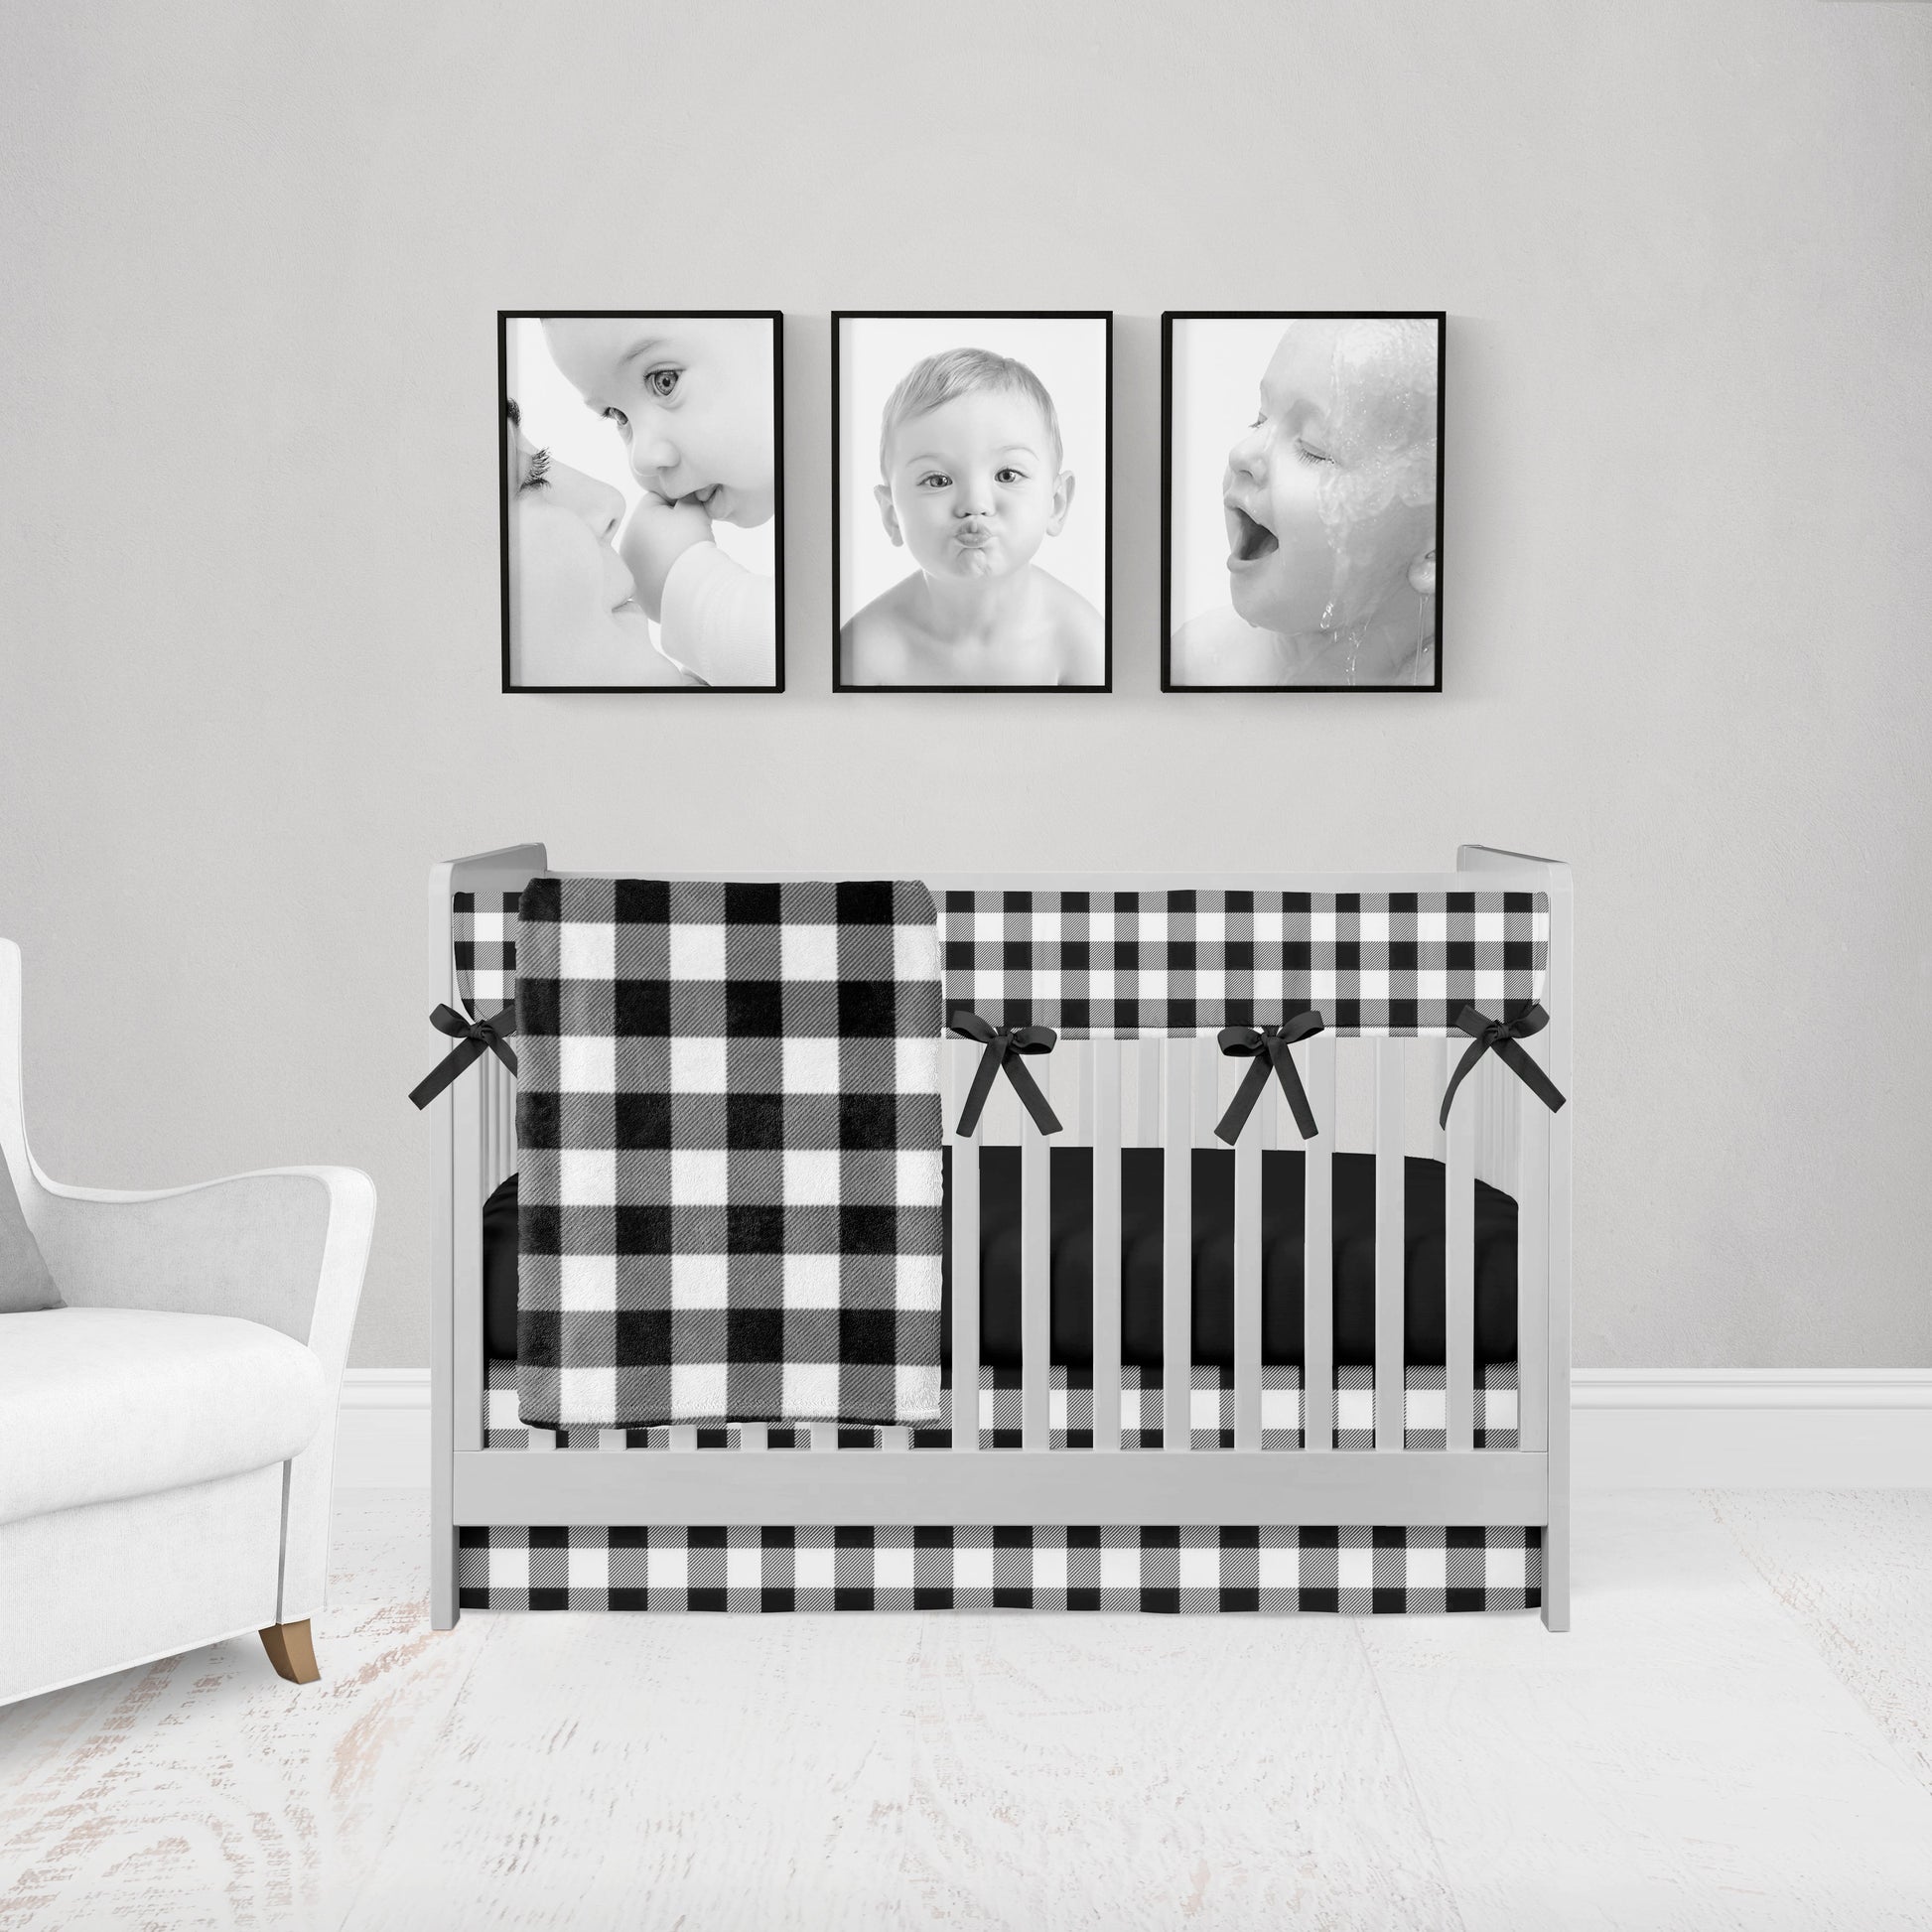 4-piece set - black gingham cotton or minky blanket, rail cover 1 long side with black ties, black crib sheet & 3-sided flat crib skirt. all gingham check will be the same size. 